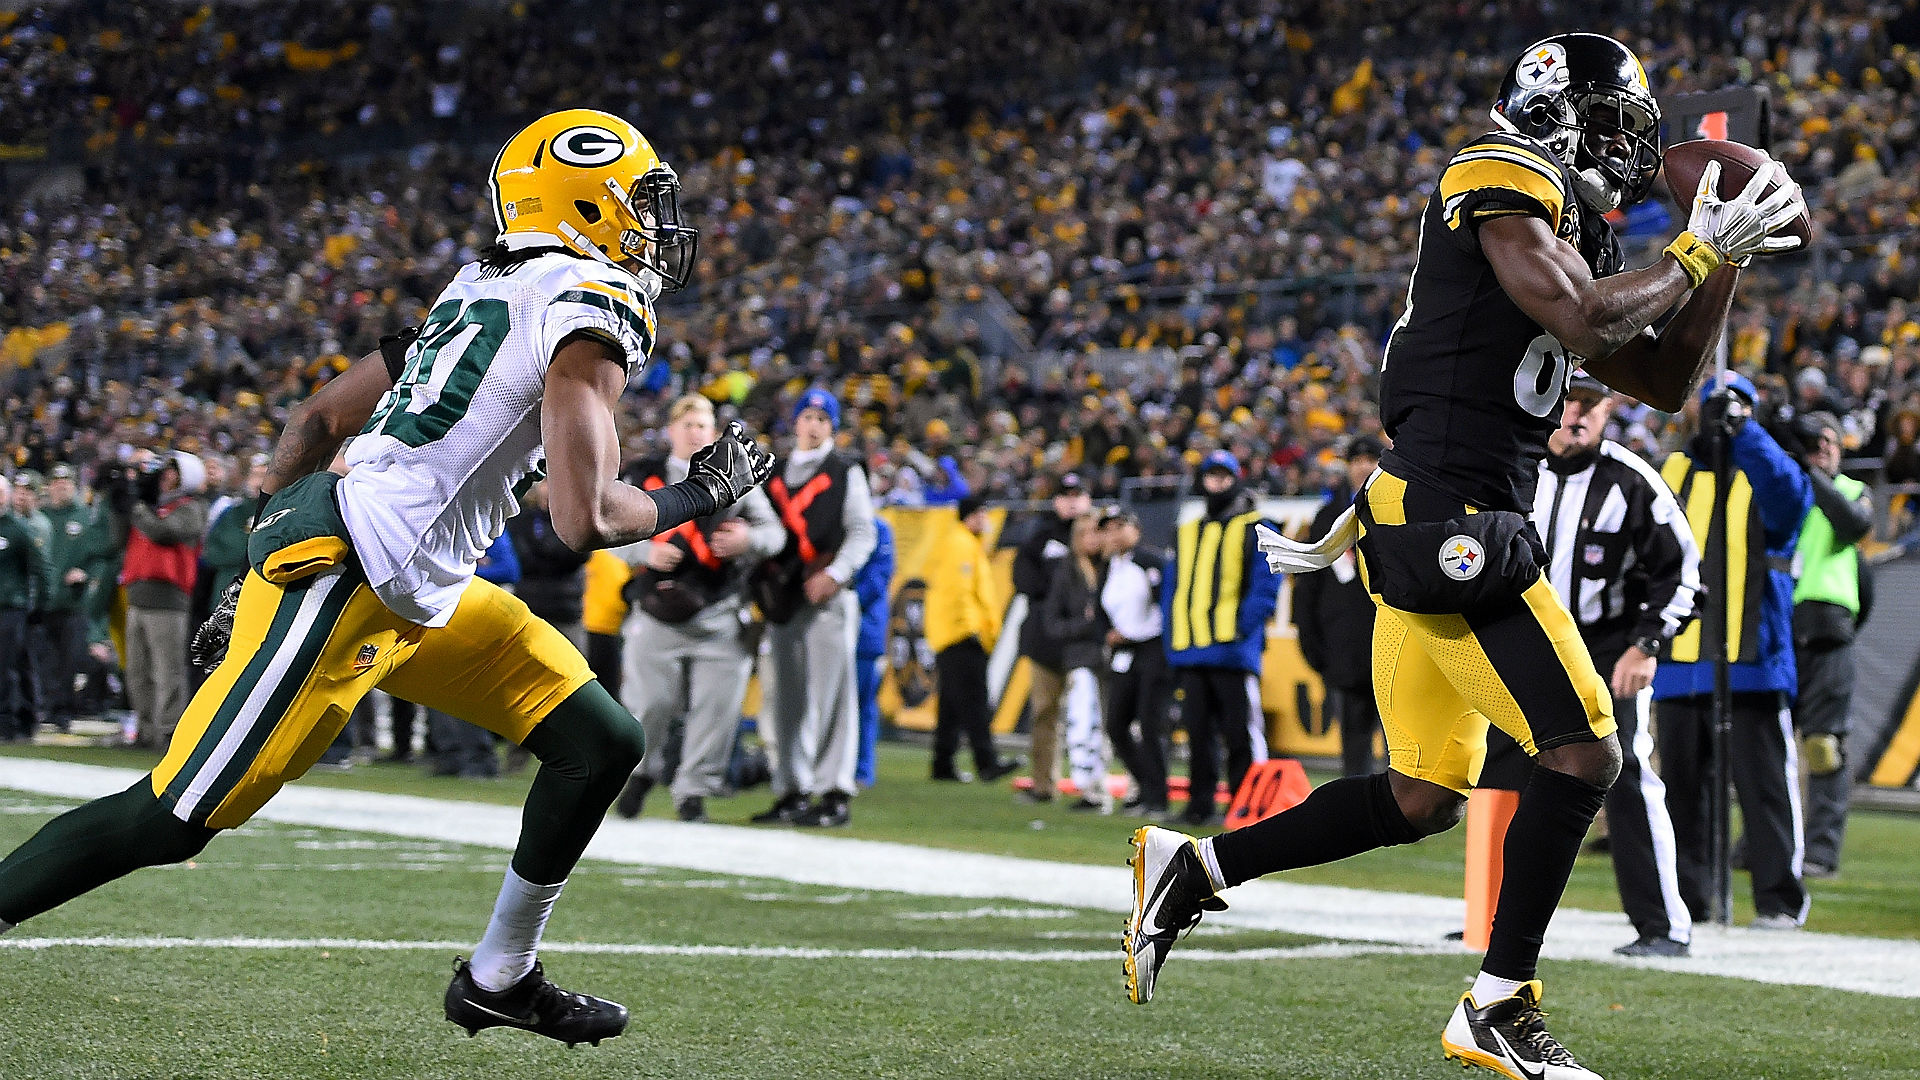 Packers vs. Steelers Score, results, highlights from Sunday night game